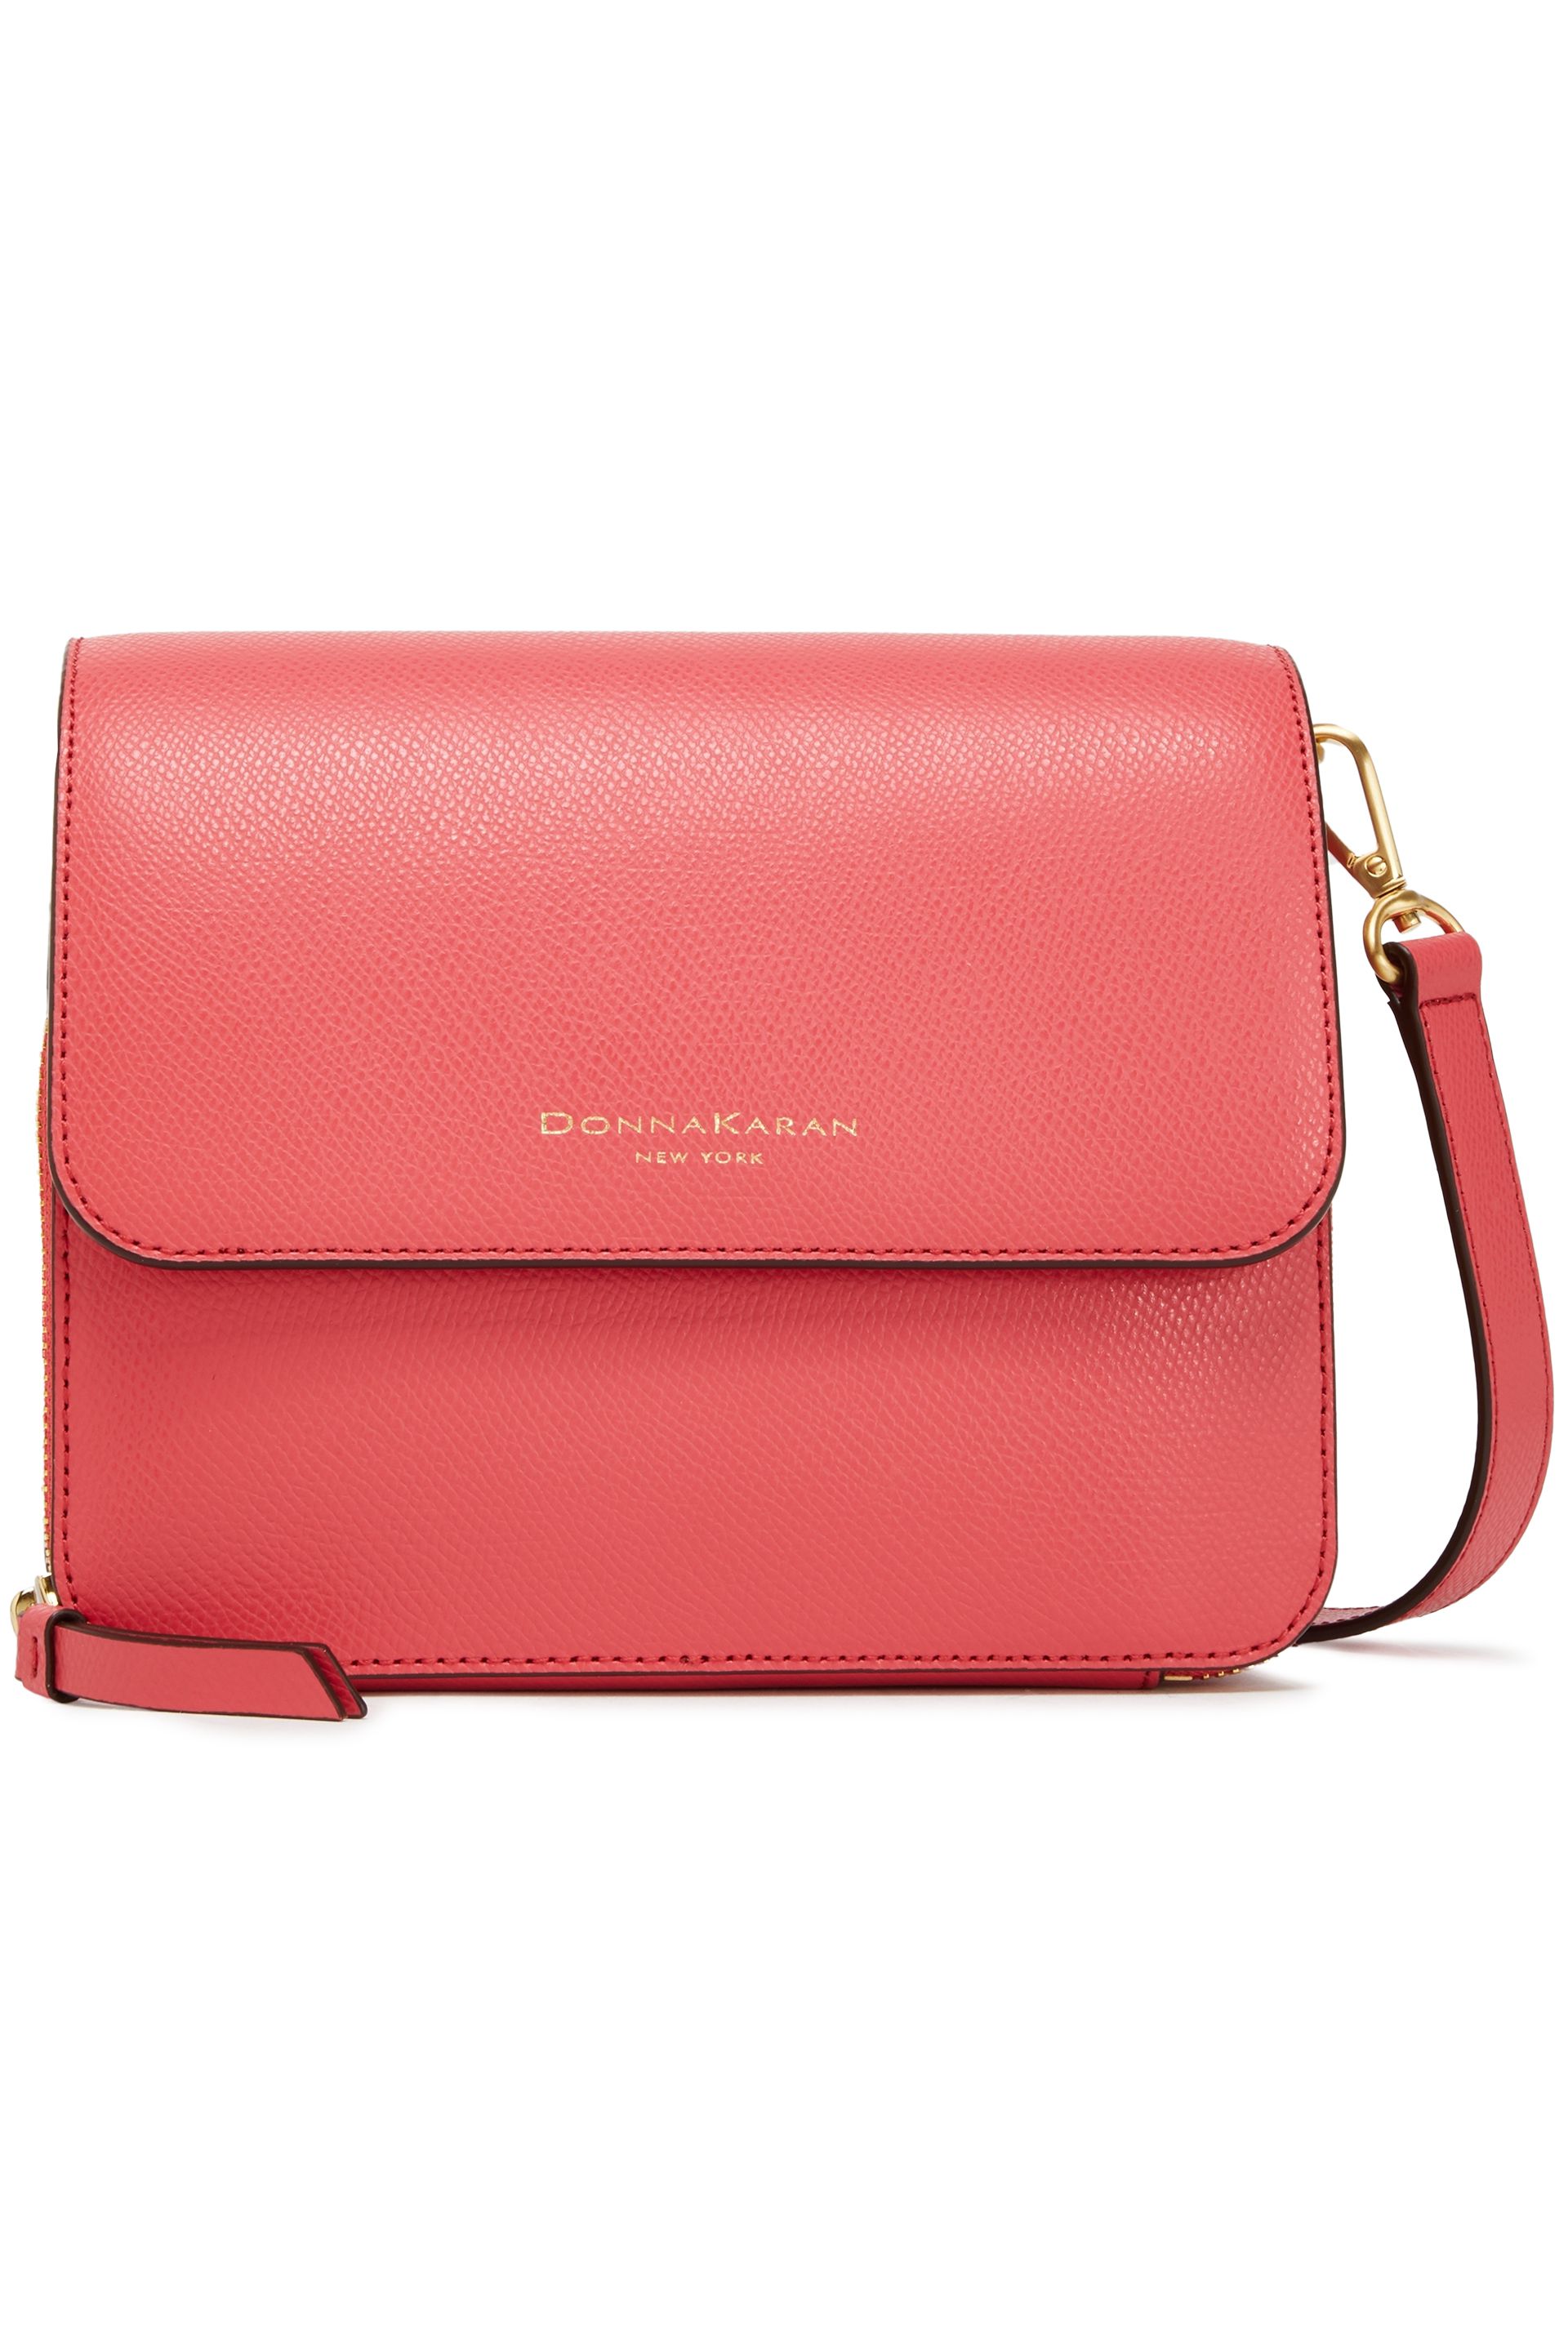 Women's Crossbody Bags | Sale up To 70% Off At THE OUTNET